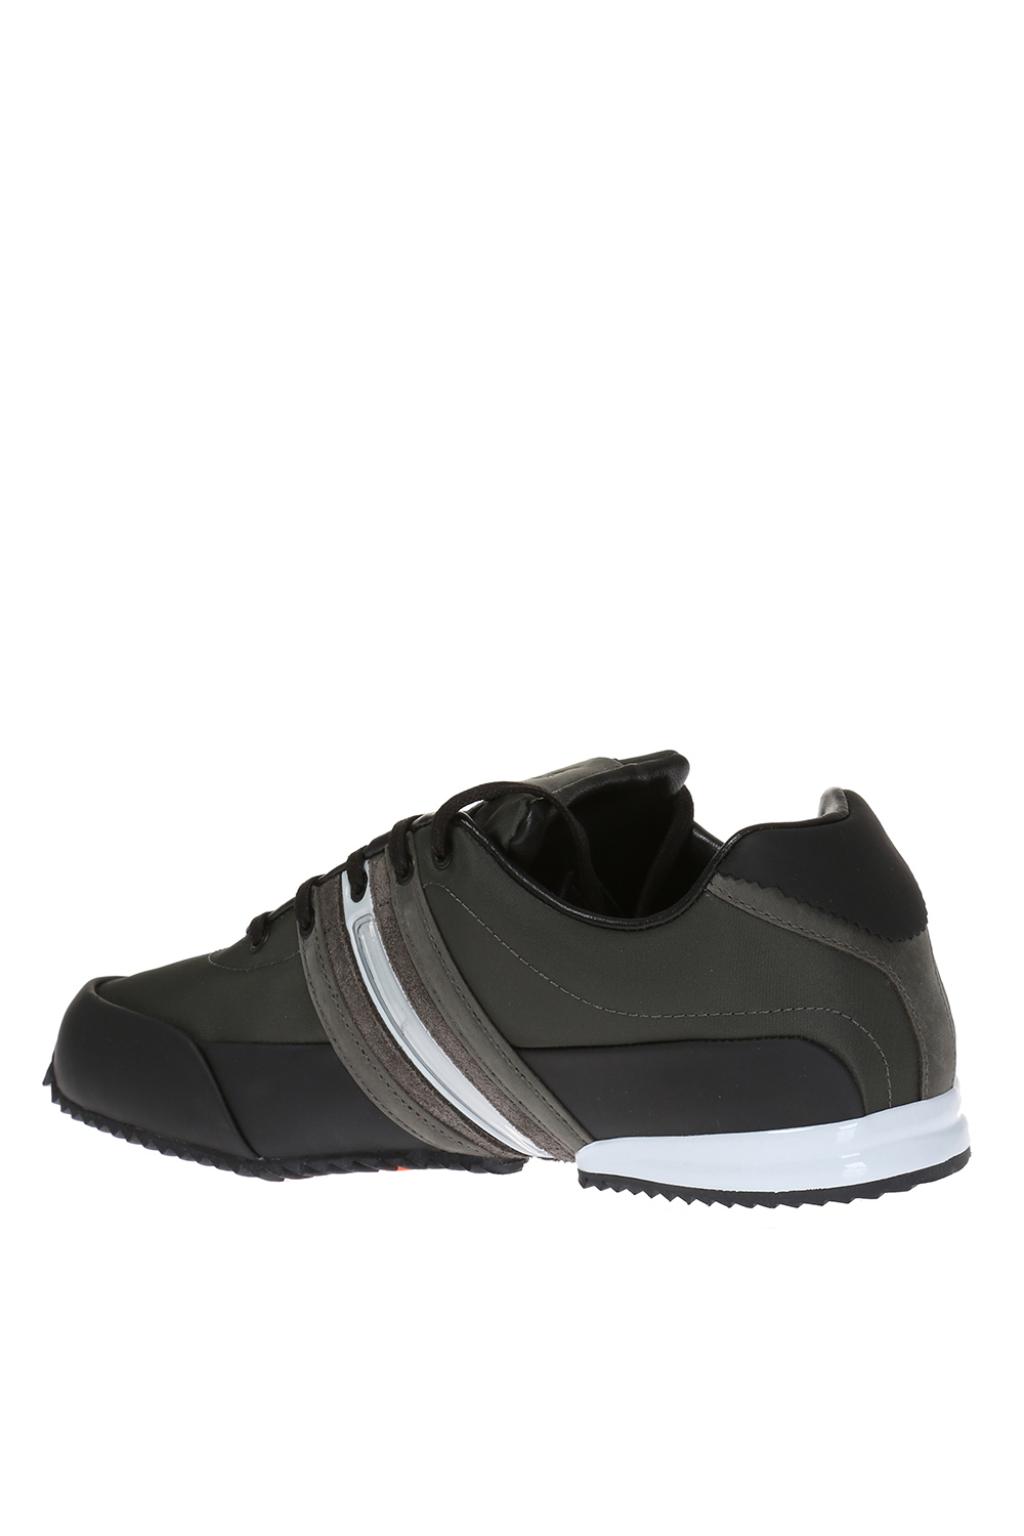 y3 sprint trainers olive